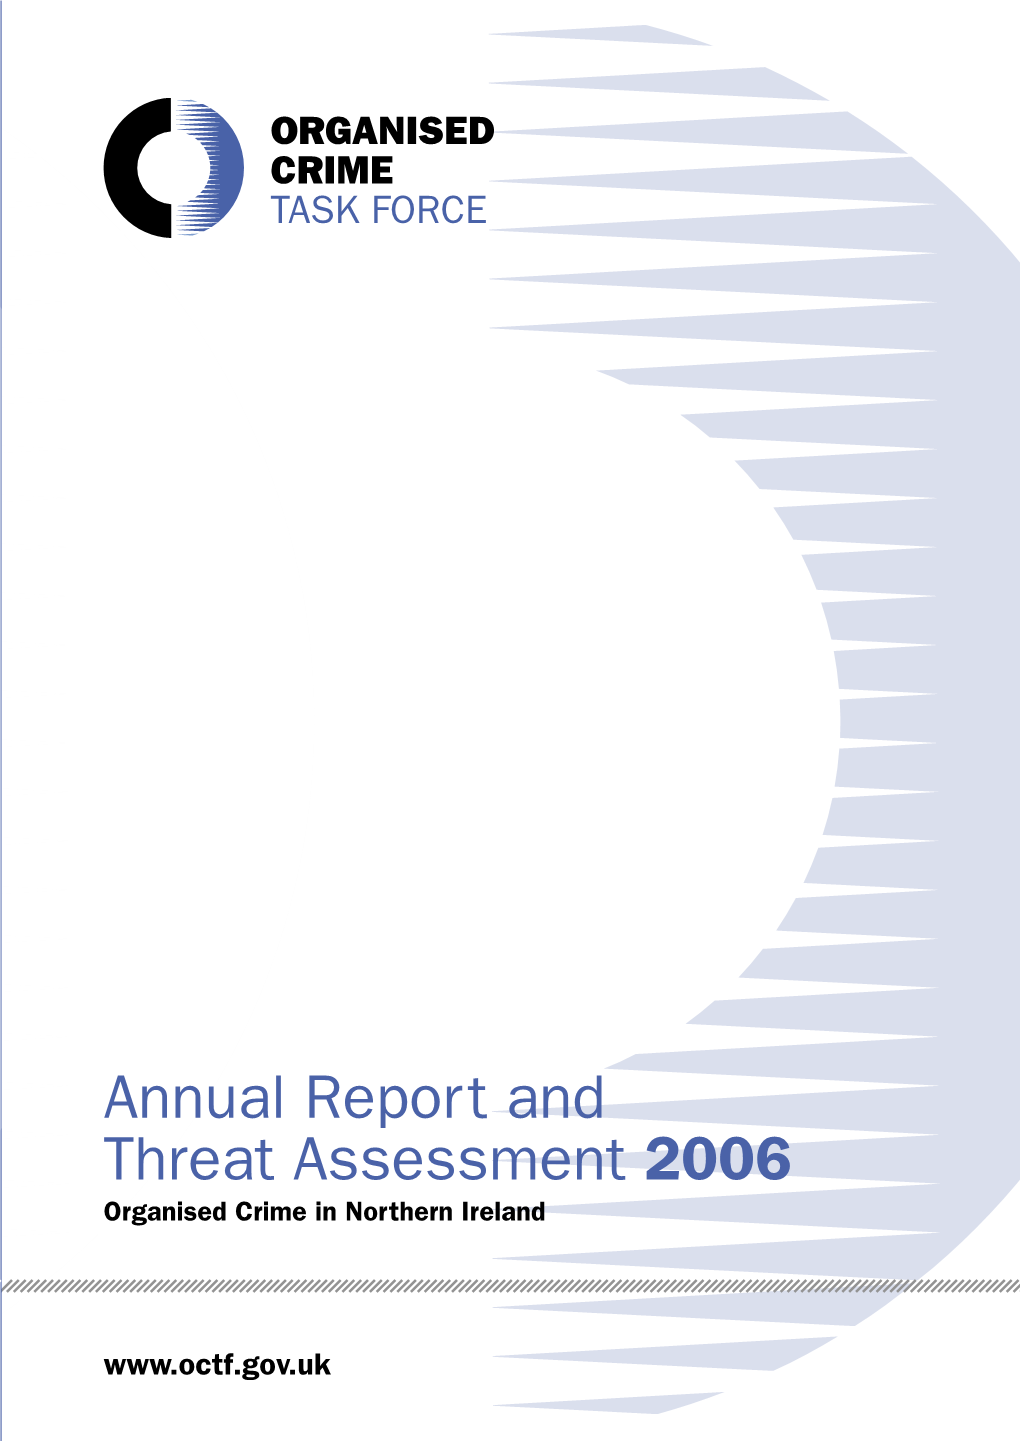 Annual Report and Threat Assessment 2006 Organised Crime in Northern Ireland